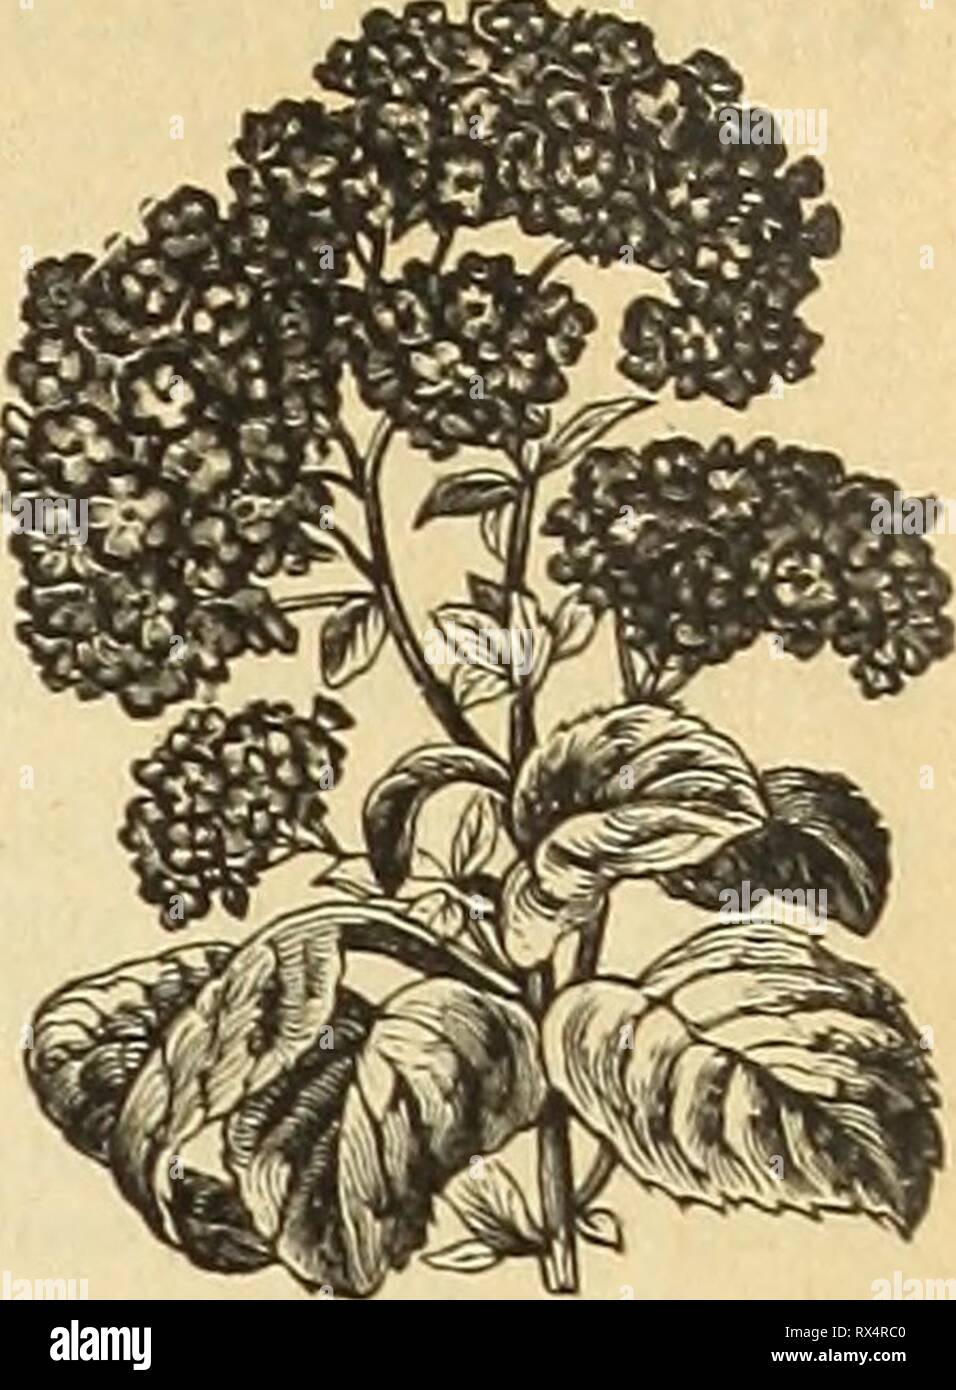 E H Hunt's catalogue (1895) E. H. Hunt's catalogue ehhuntscatalogu1895ehhu 0 Year: 1895  GLOXINIA. Trade Pkt. Oz. Glaucium Luteum.  Geranium, apple scented 1,000 seeds, S2.00; 100 Zonale, single, mixed- Gilla, mixed.  .. Defiance, new, Godetia, finest mixed - Lady Albemarle   10 Lady Satin Rose Gomphrena Globosa, white, red, golden or mixed Gypsophila Paniculata, white, fine for bouquets Elegans, white, ' ' Helianthus (Sunflower) Cucumerifolius or Miniature Argophyllus, leaves are clothed with a silvery down Nanus Folis Variegatis, green and yellow foliage. Helichrysum Alonstrosum, Dr. Livings Stock Photo